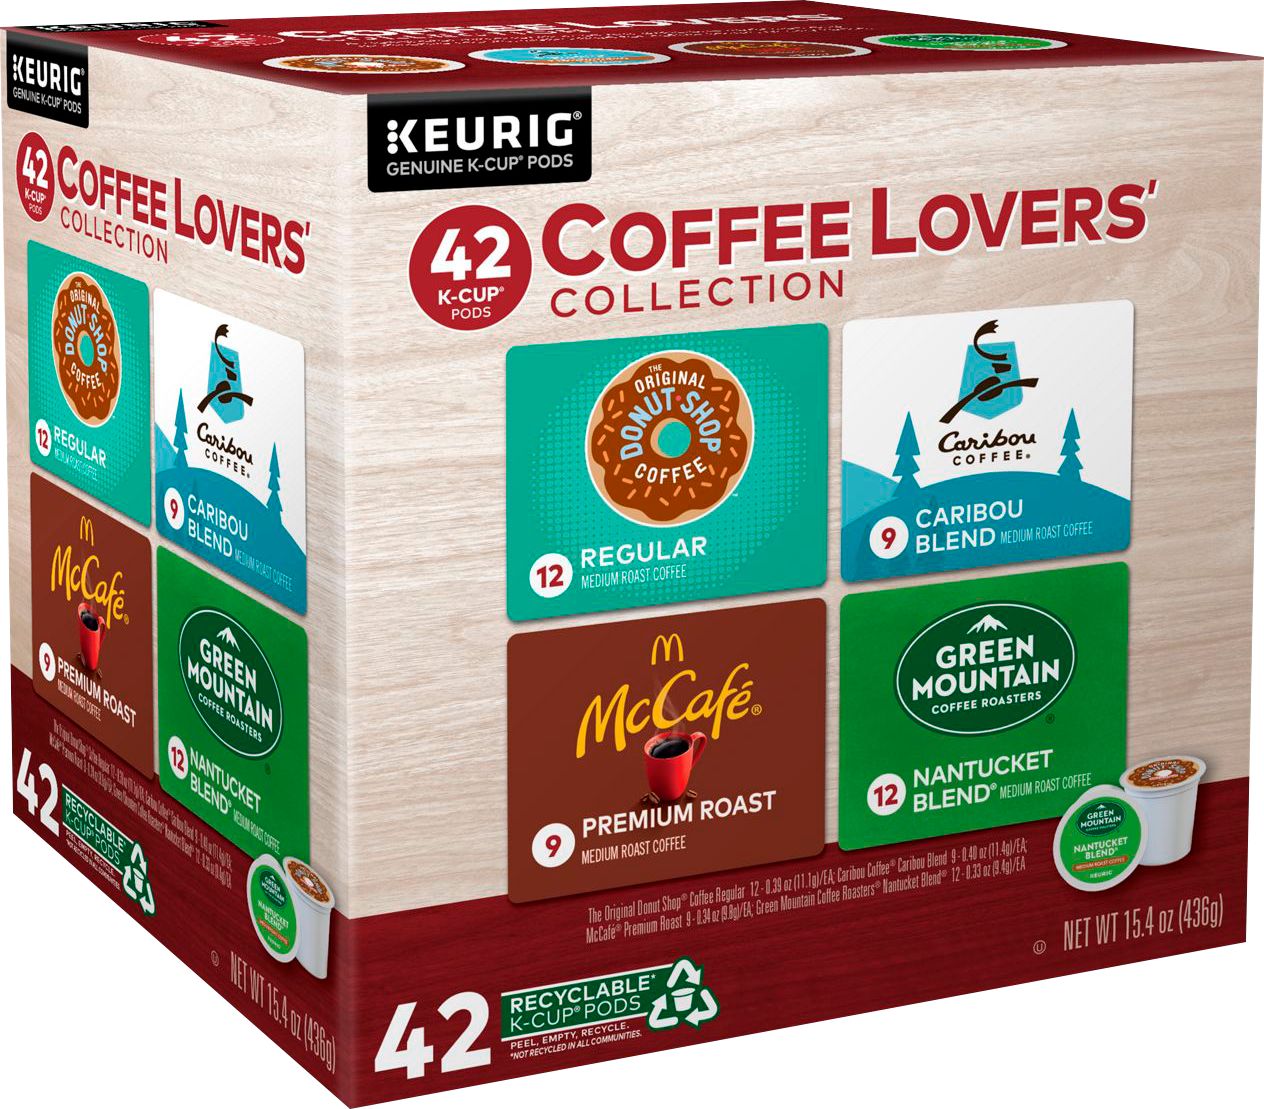 Angle View: McCafe - Premium Roast K-Cup Pods, 24 Count